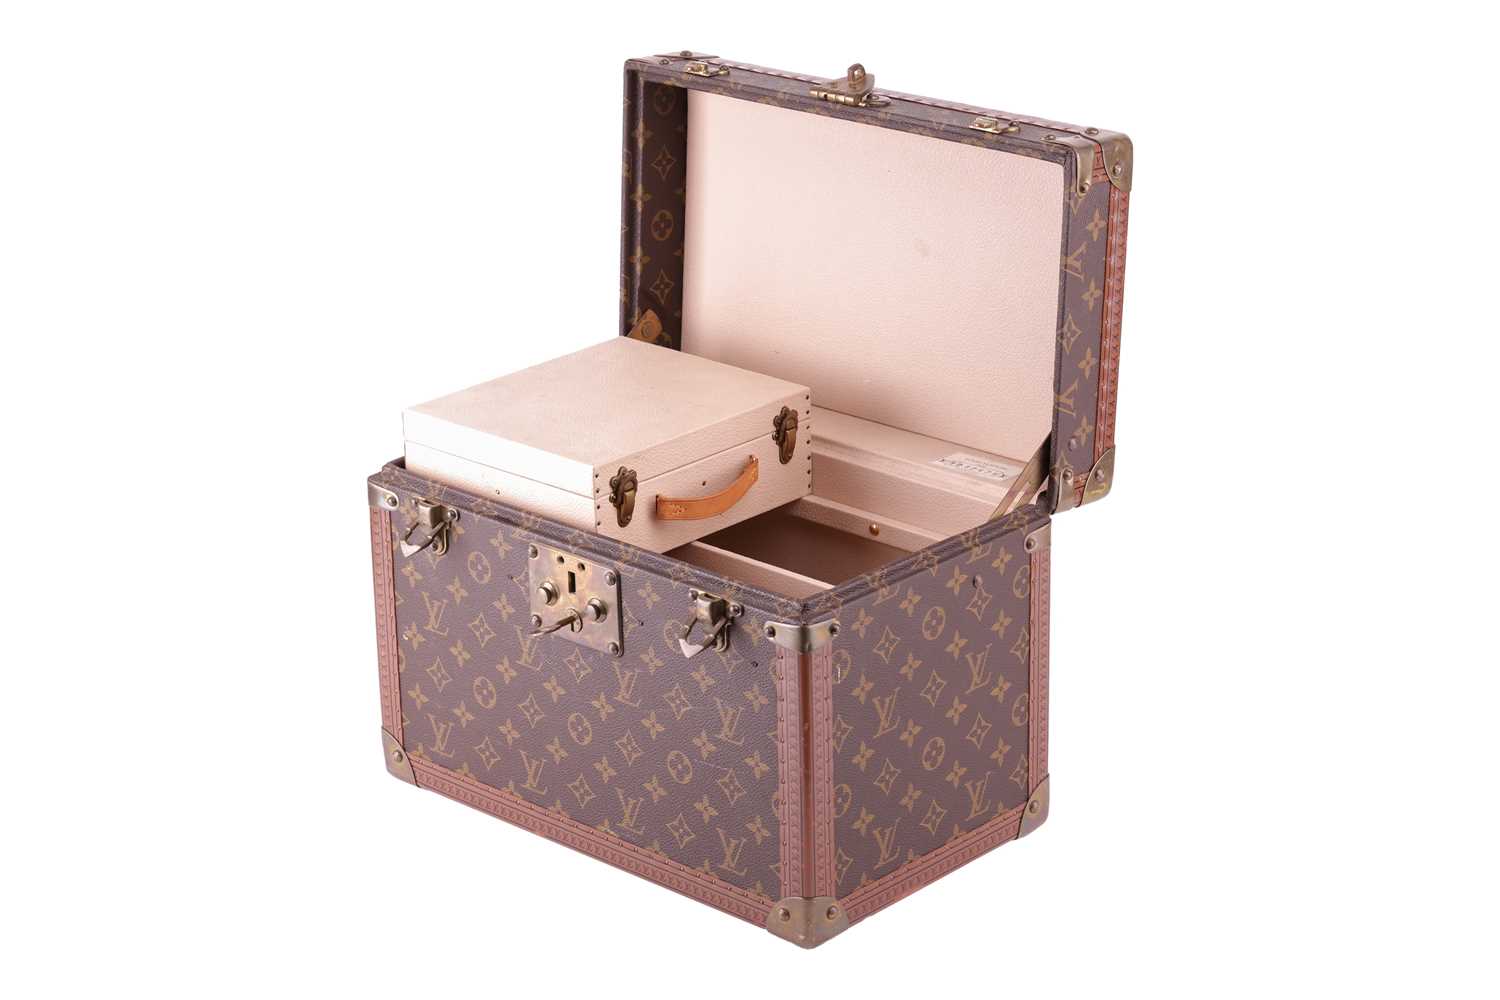 Louis Vuitton - a 'Boîte à Pharmacie' (pharmacy box) vanity case, in brown monogram canvas, brass lo - Image 10 of 15